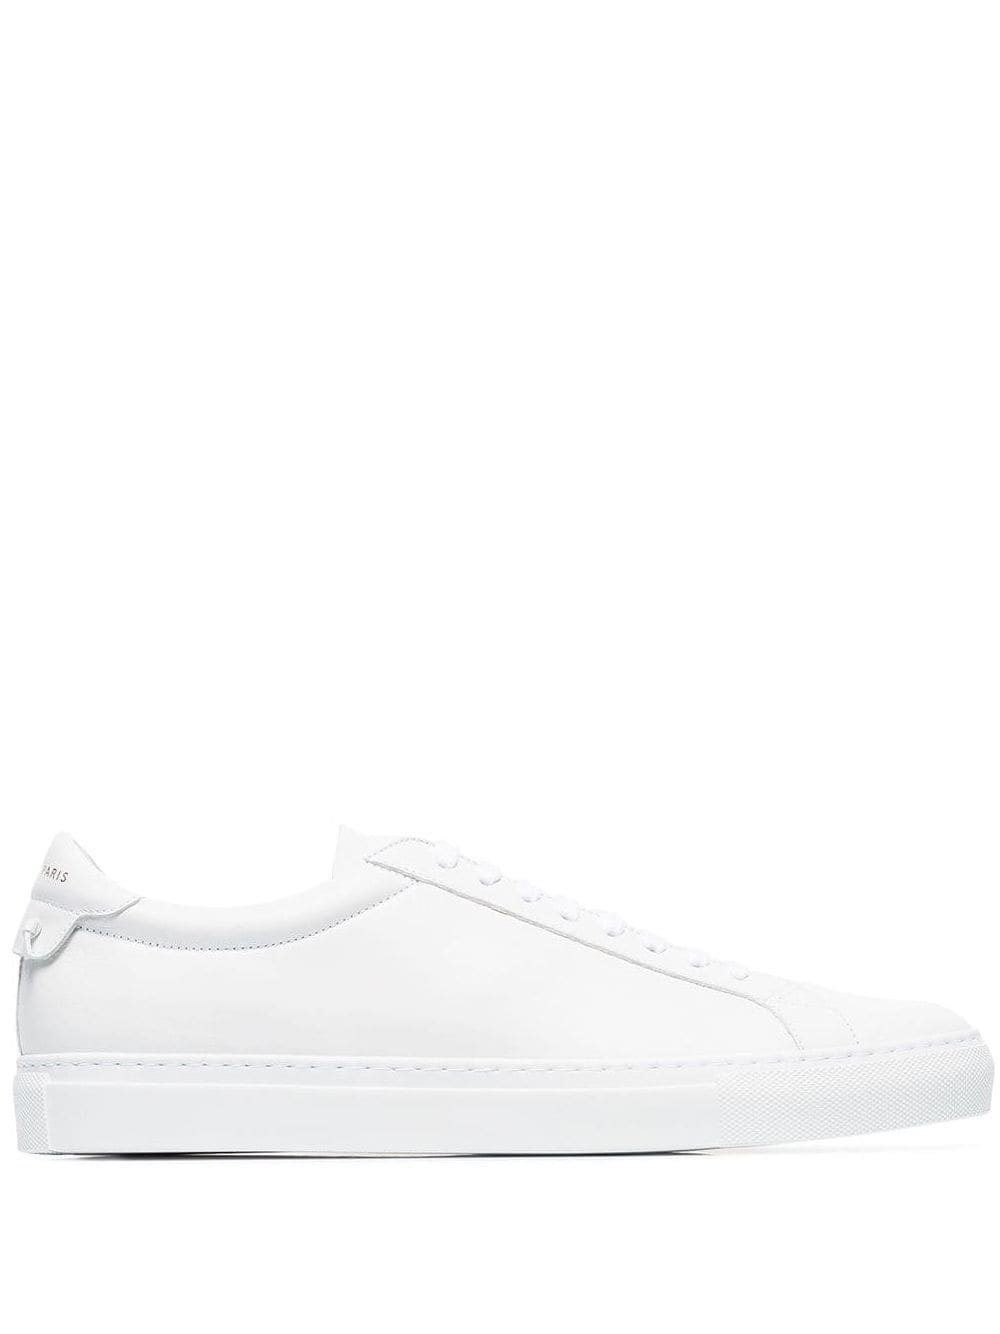 Urban Street Leather Sneakers мъжки обувки Givenchy 833074504_39